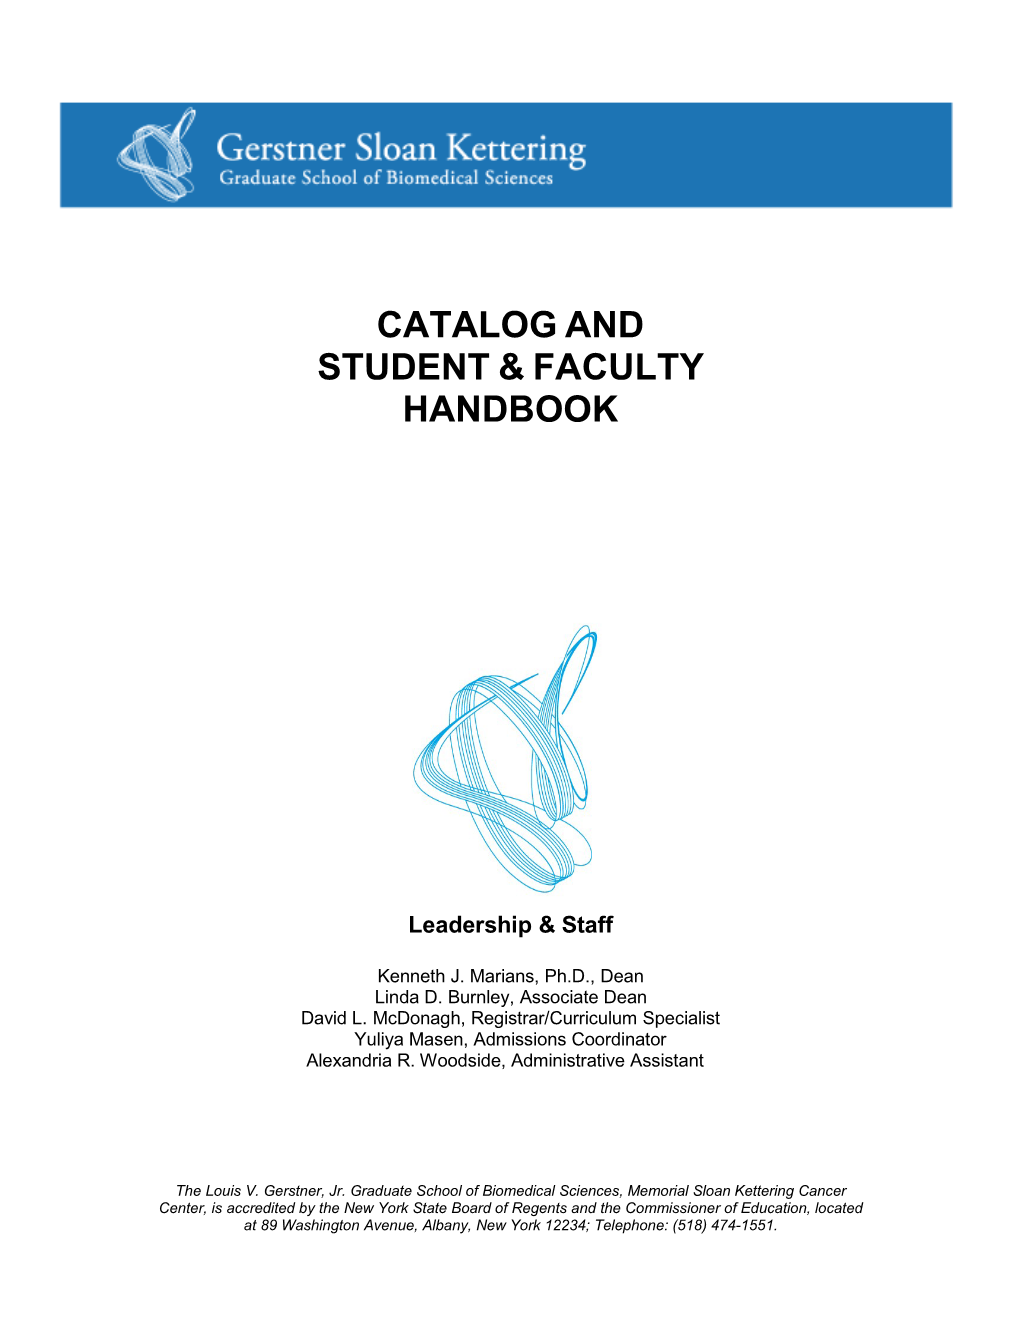 Catalog and Student & Faculty Handbook